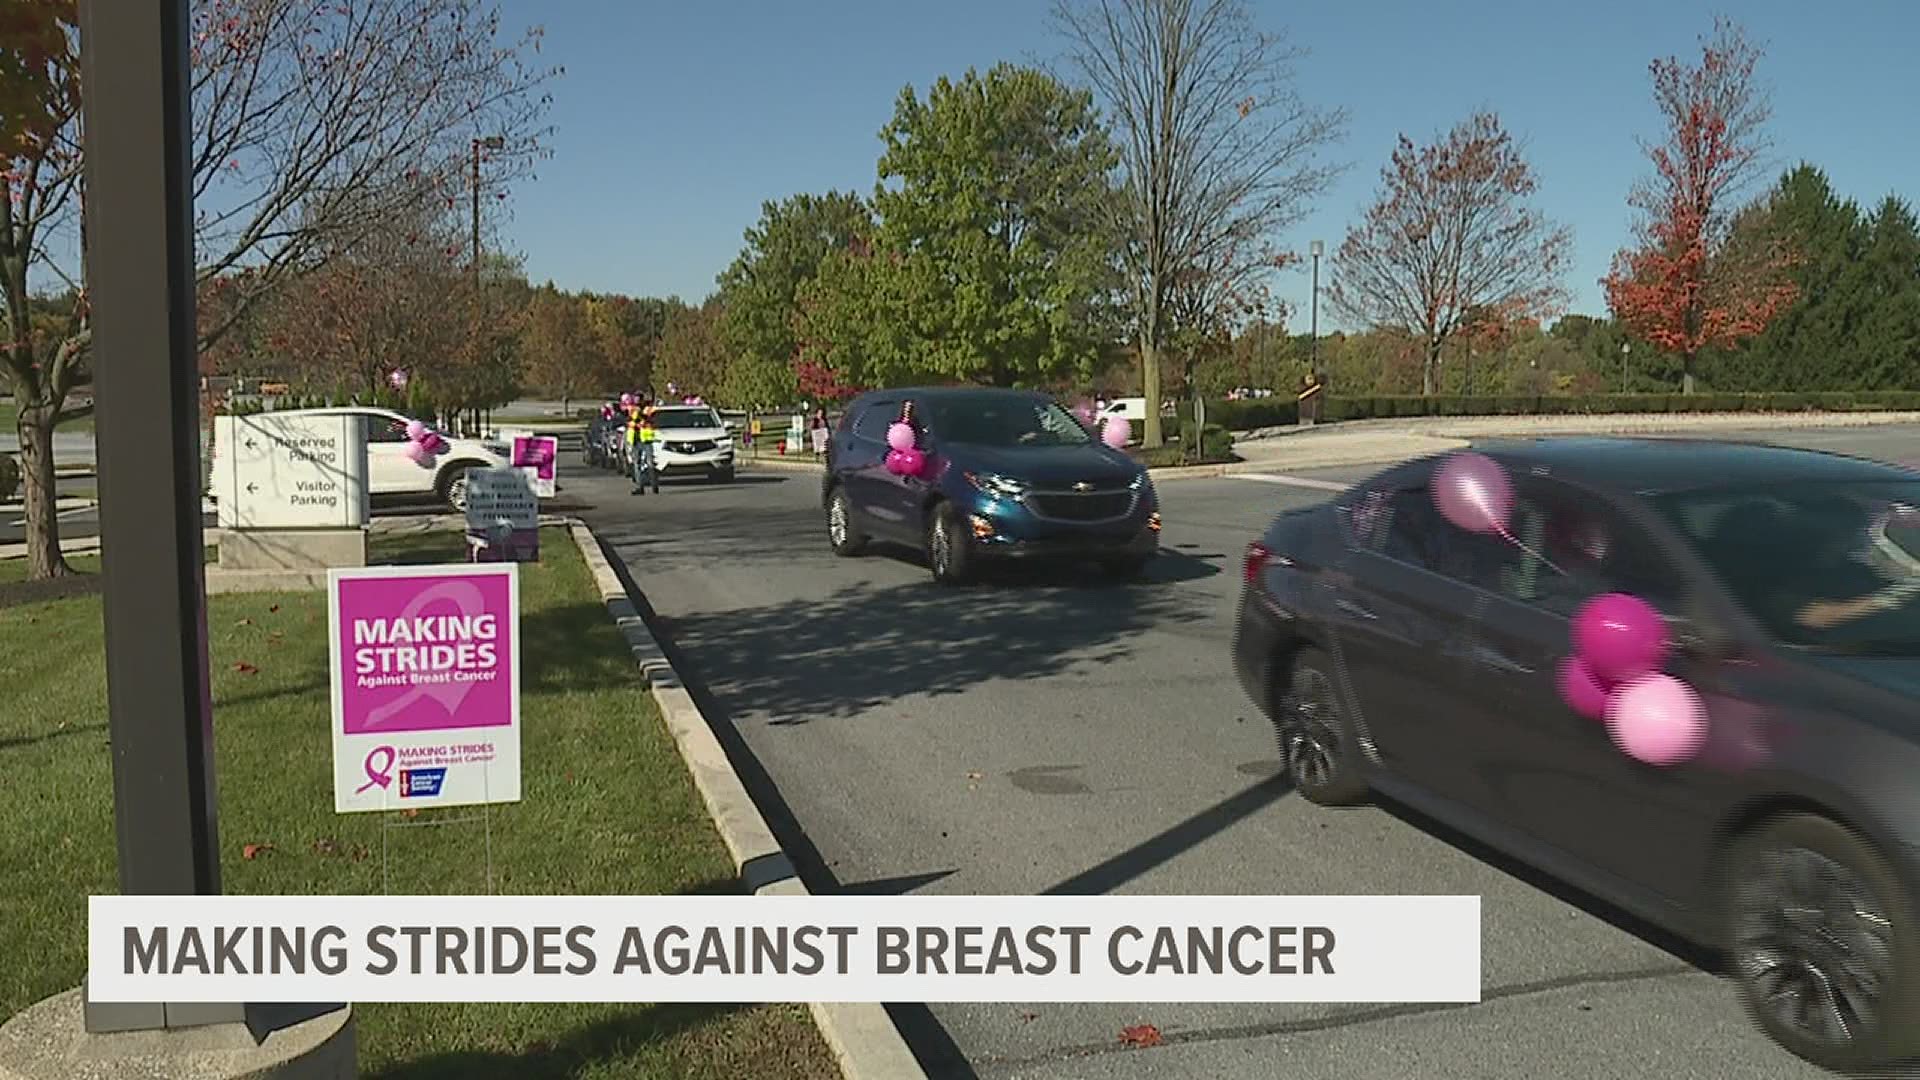 Thousands showed up to help raise money to support breast cancer research